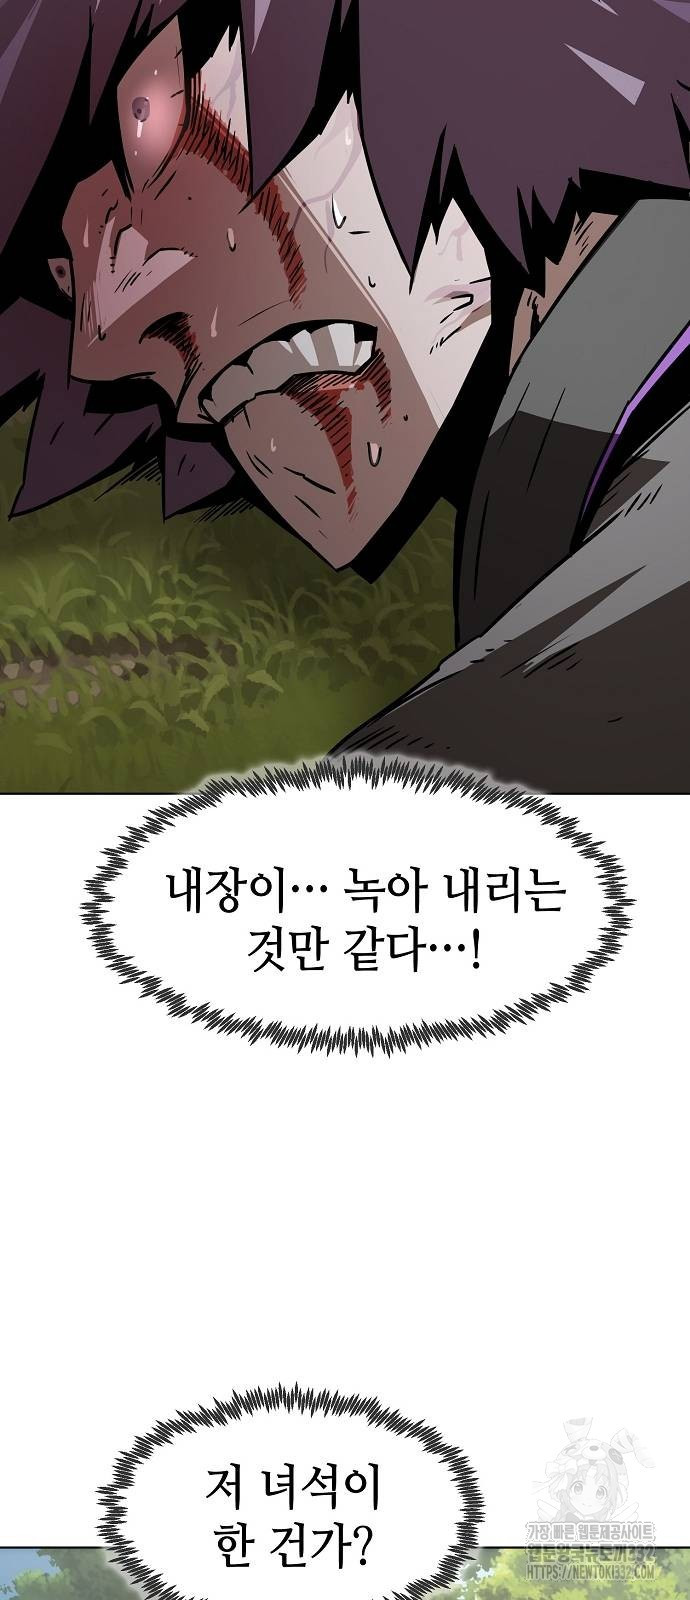 Becoming the Sacheon Dangs Swordsmaster-Rank Young Lord - Chapter 9 - Page 5